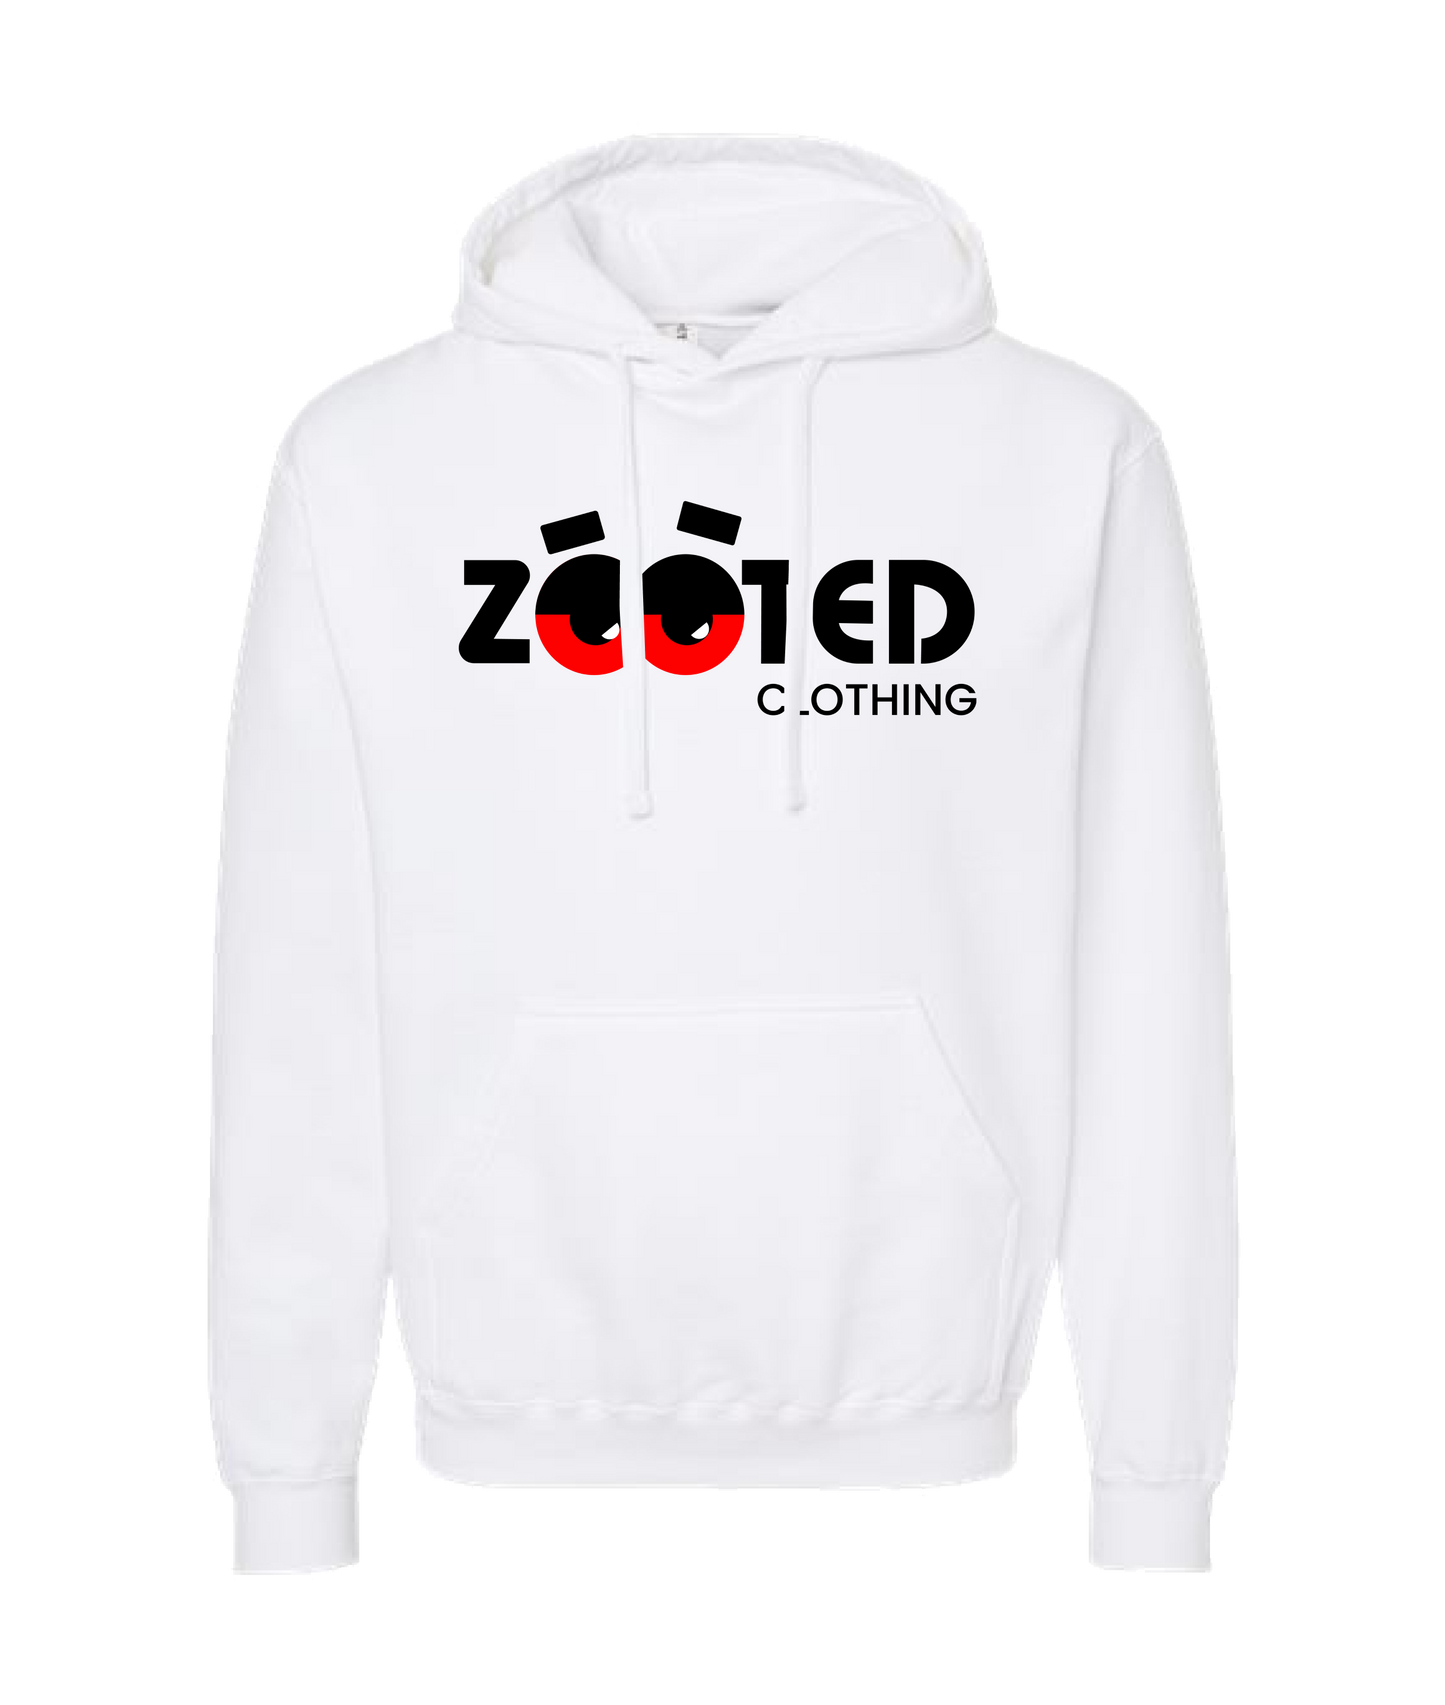 Zooted Clothing - ZC - White Hoodie